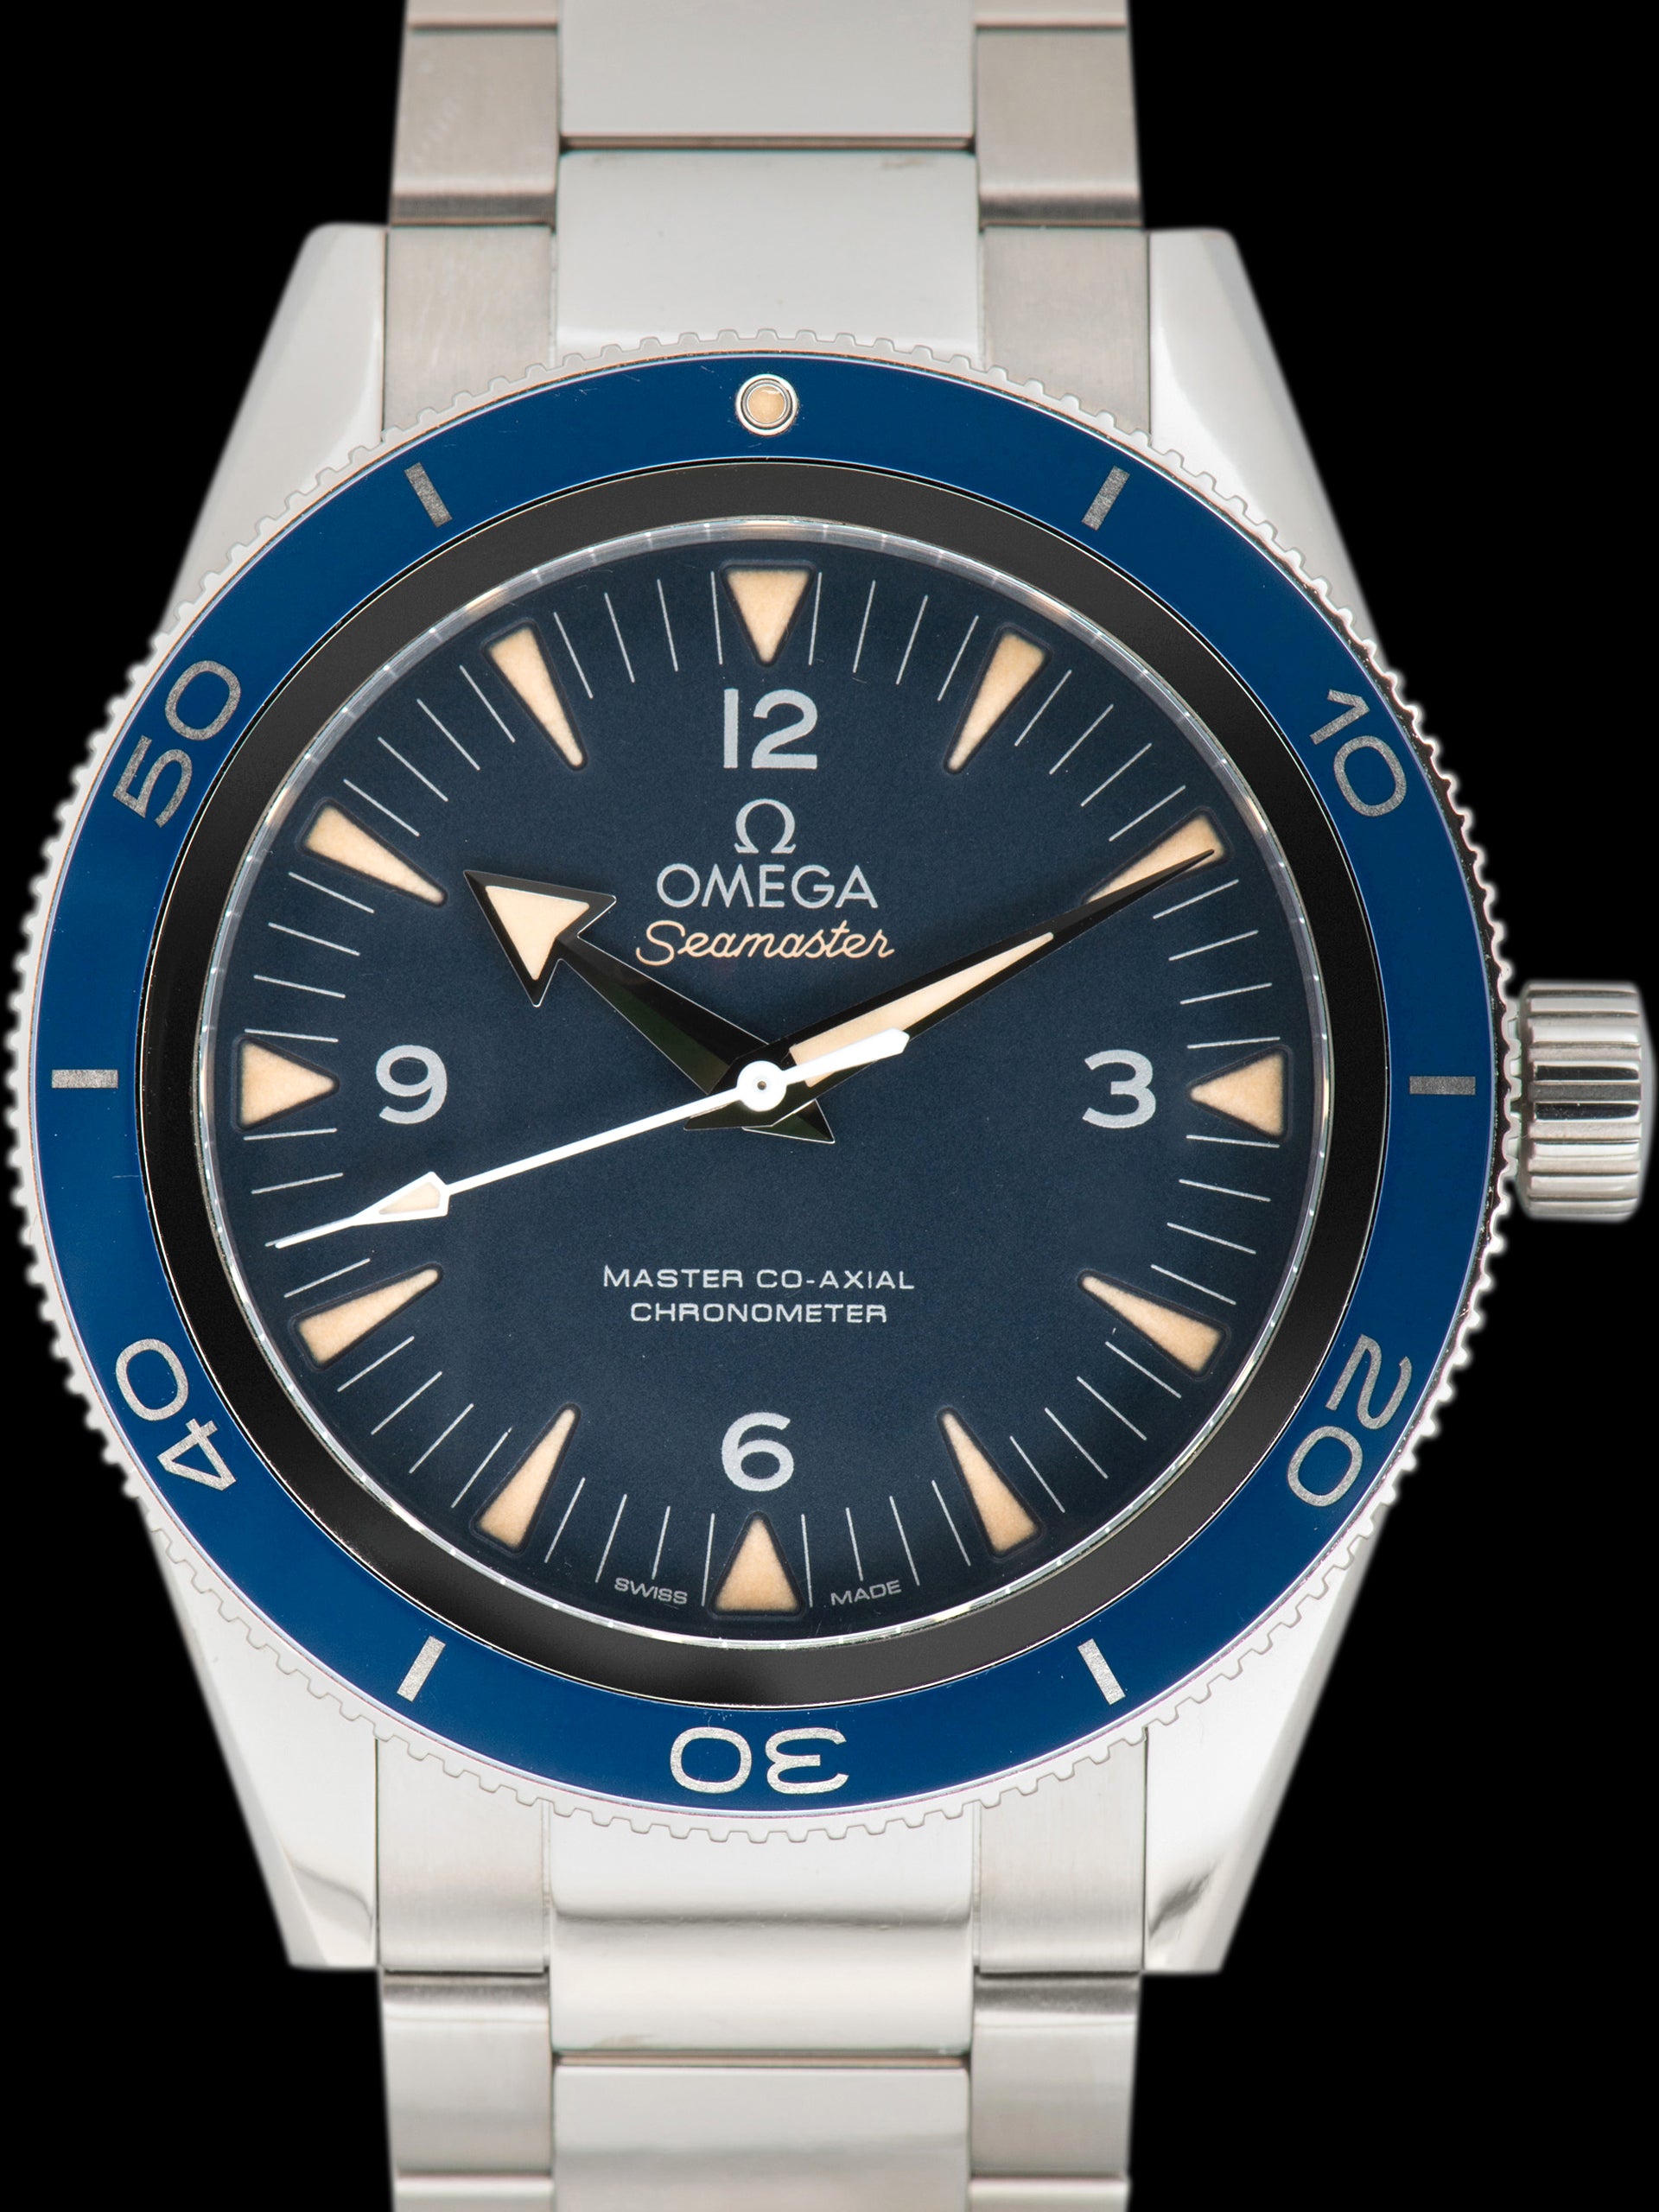 *NEW* Omega Seamaster 300 Co-Axial (Ref. 233.90.41.21.03.001) "Titanium" W/ Box & Papers